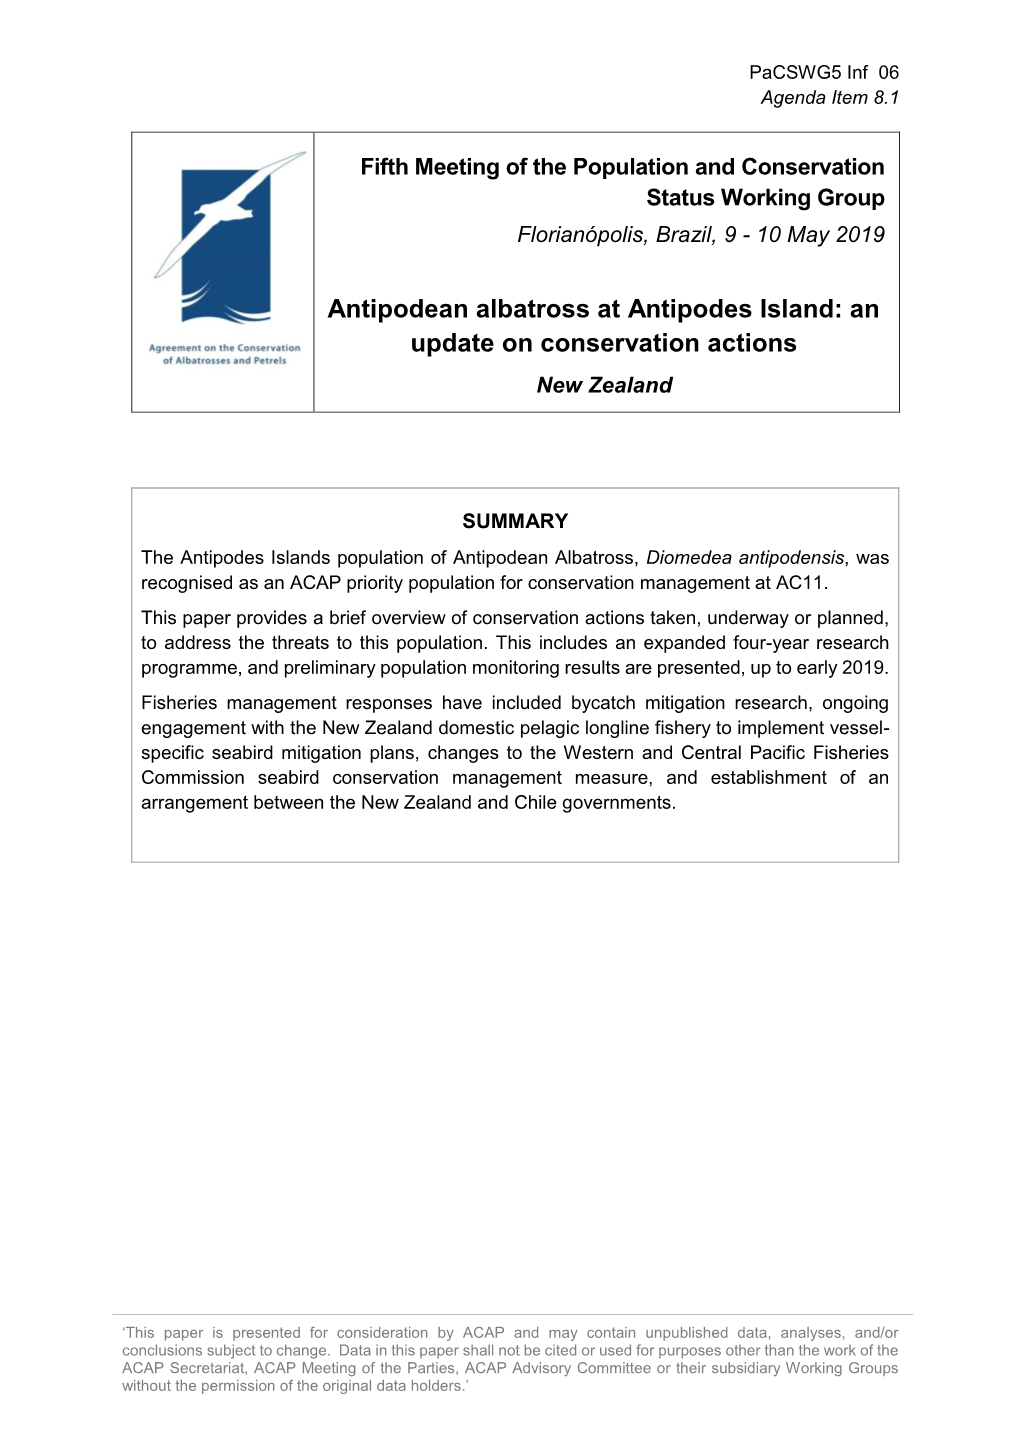 Antipodean Albatross at Antipodes Island: an Update on Conservation Actions New Zealand